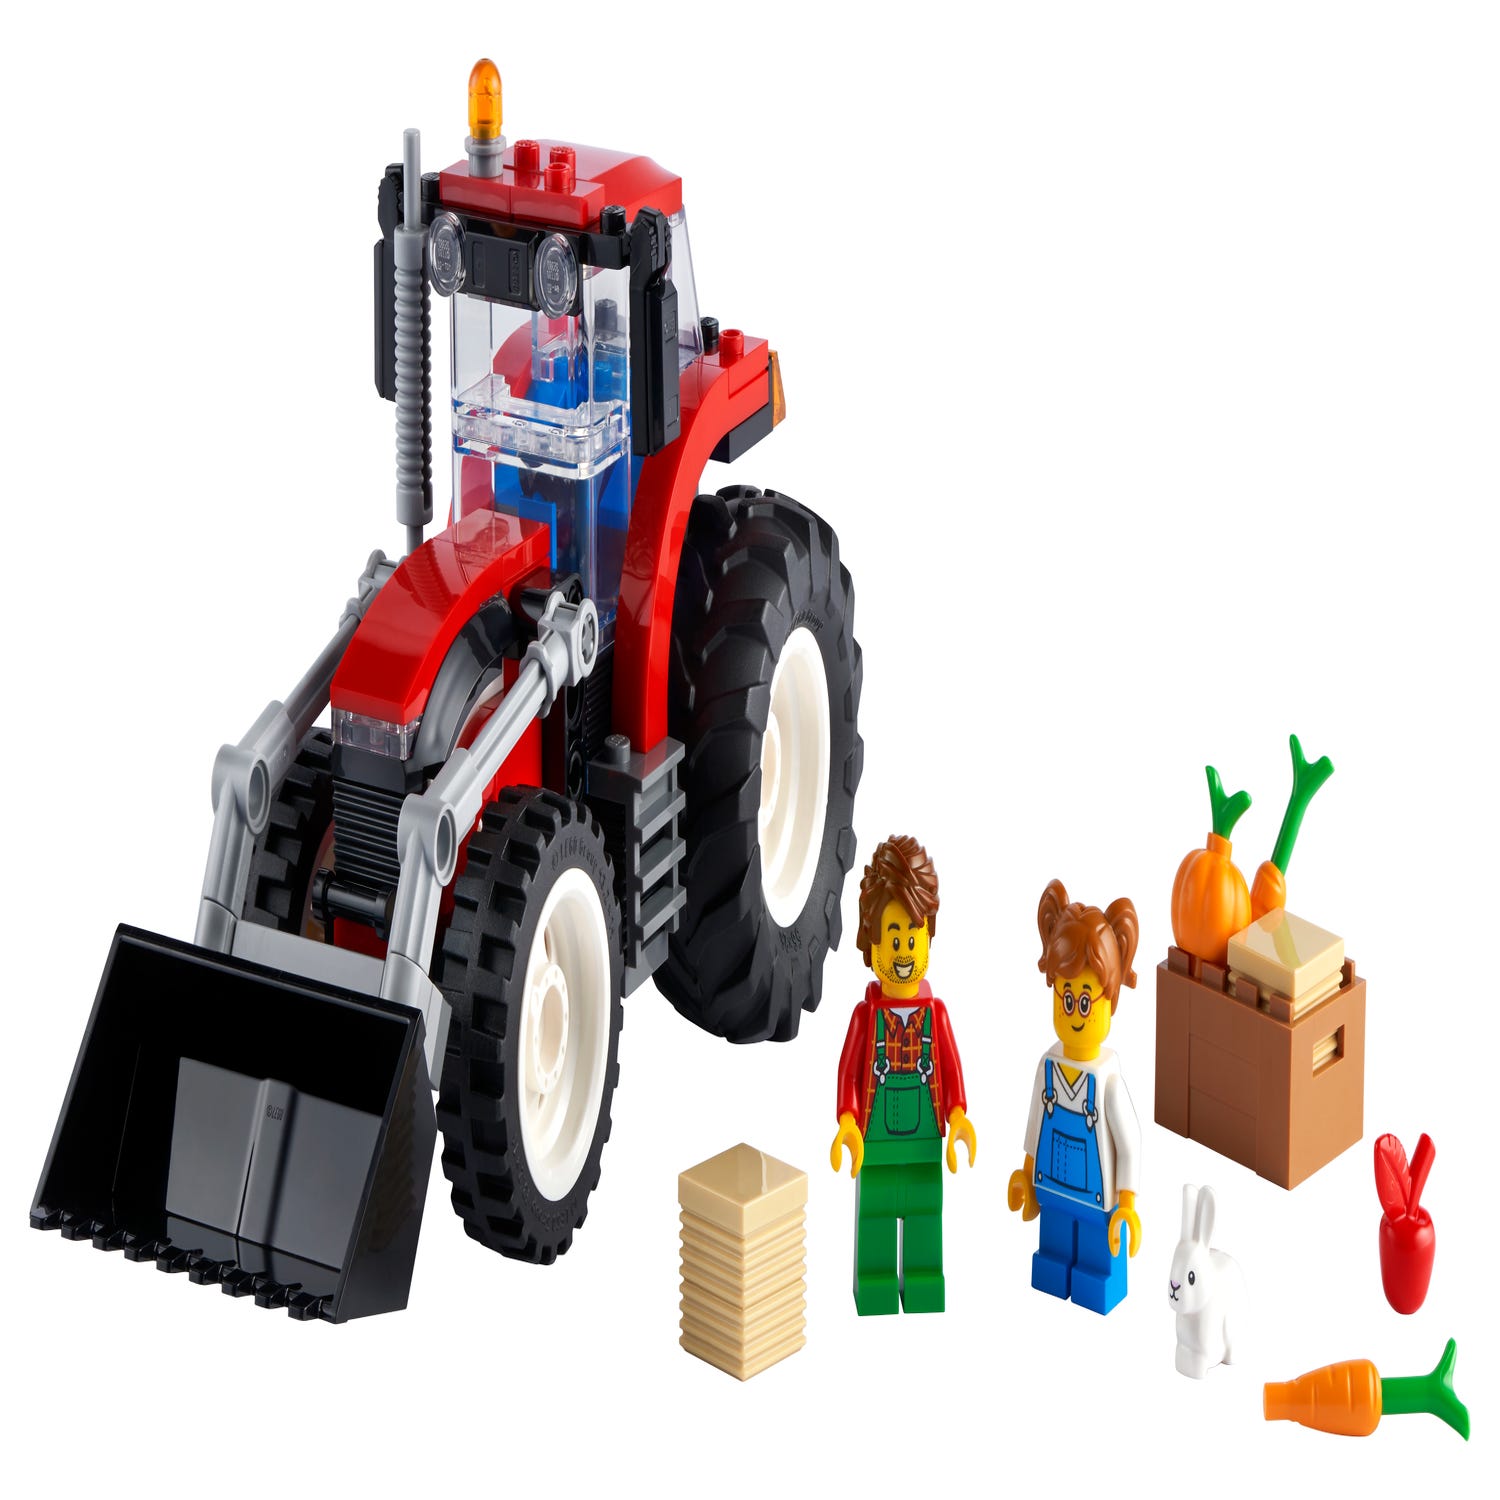 Archeologie Echter riem Tractor 60287 | City | Buy online at the Official LEGO® Shop US